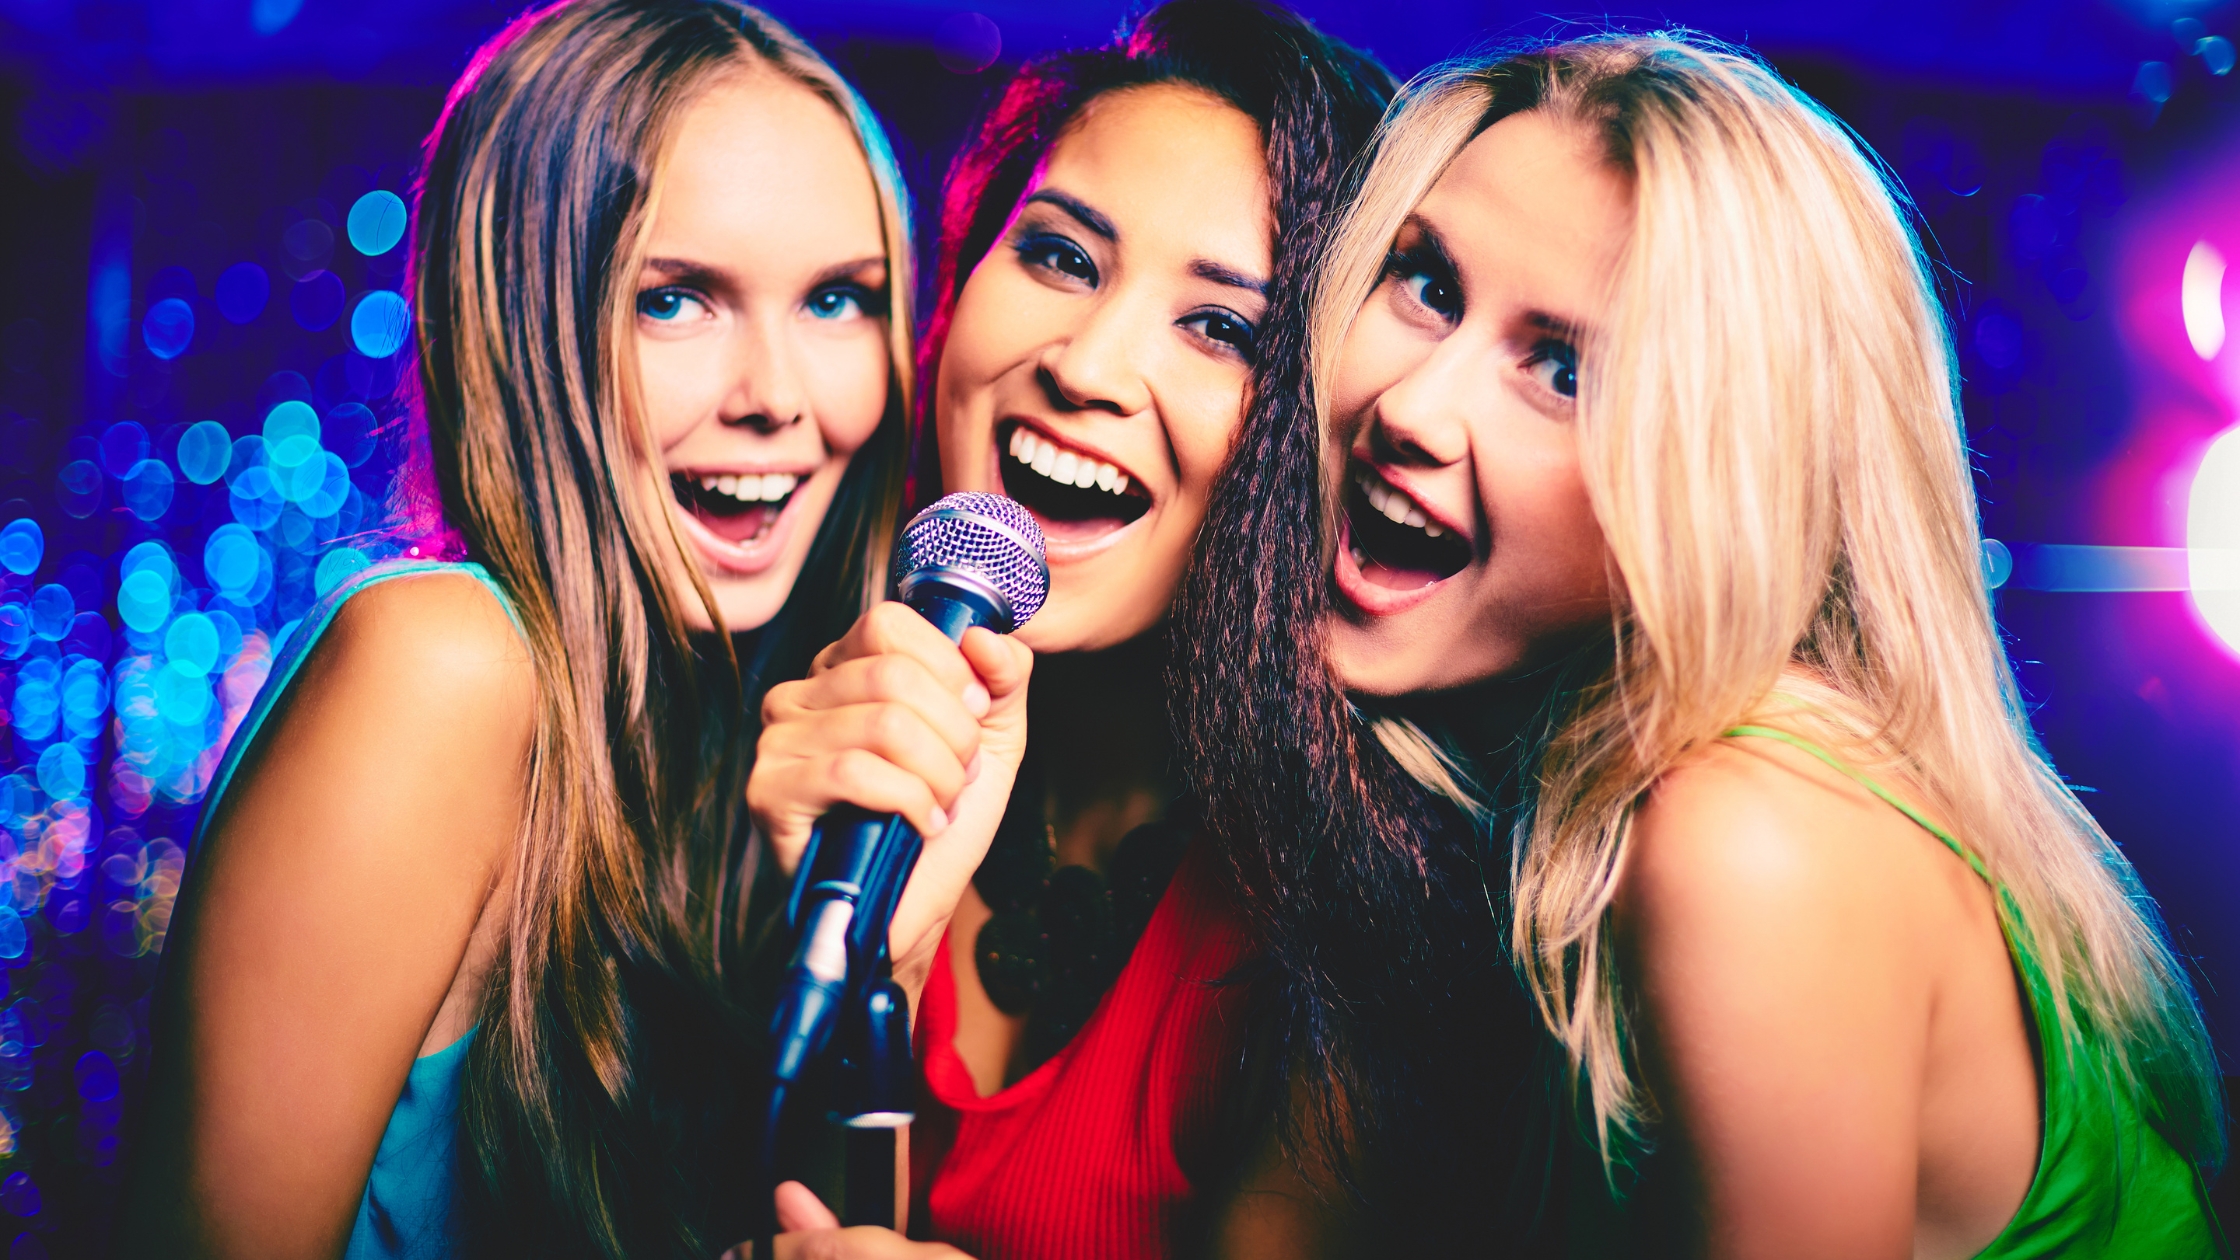 20 Fun Things to Do at a Bachelorette Party